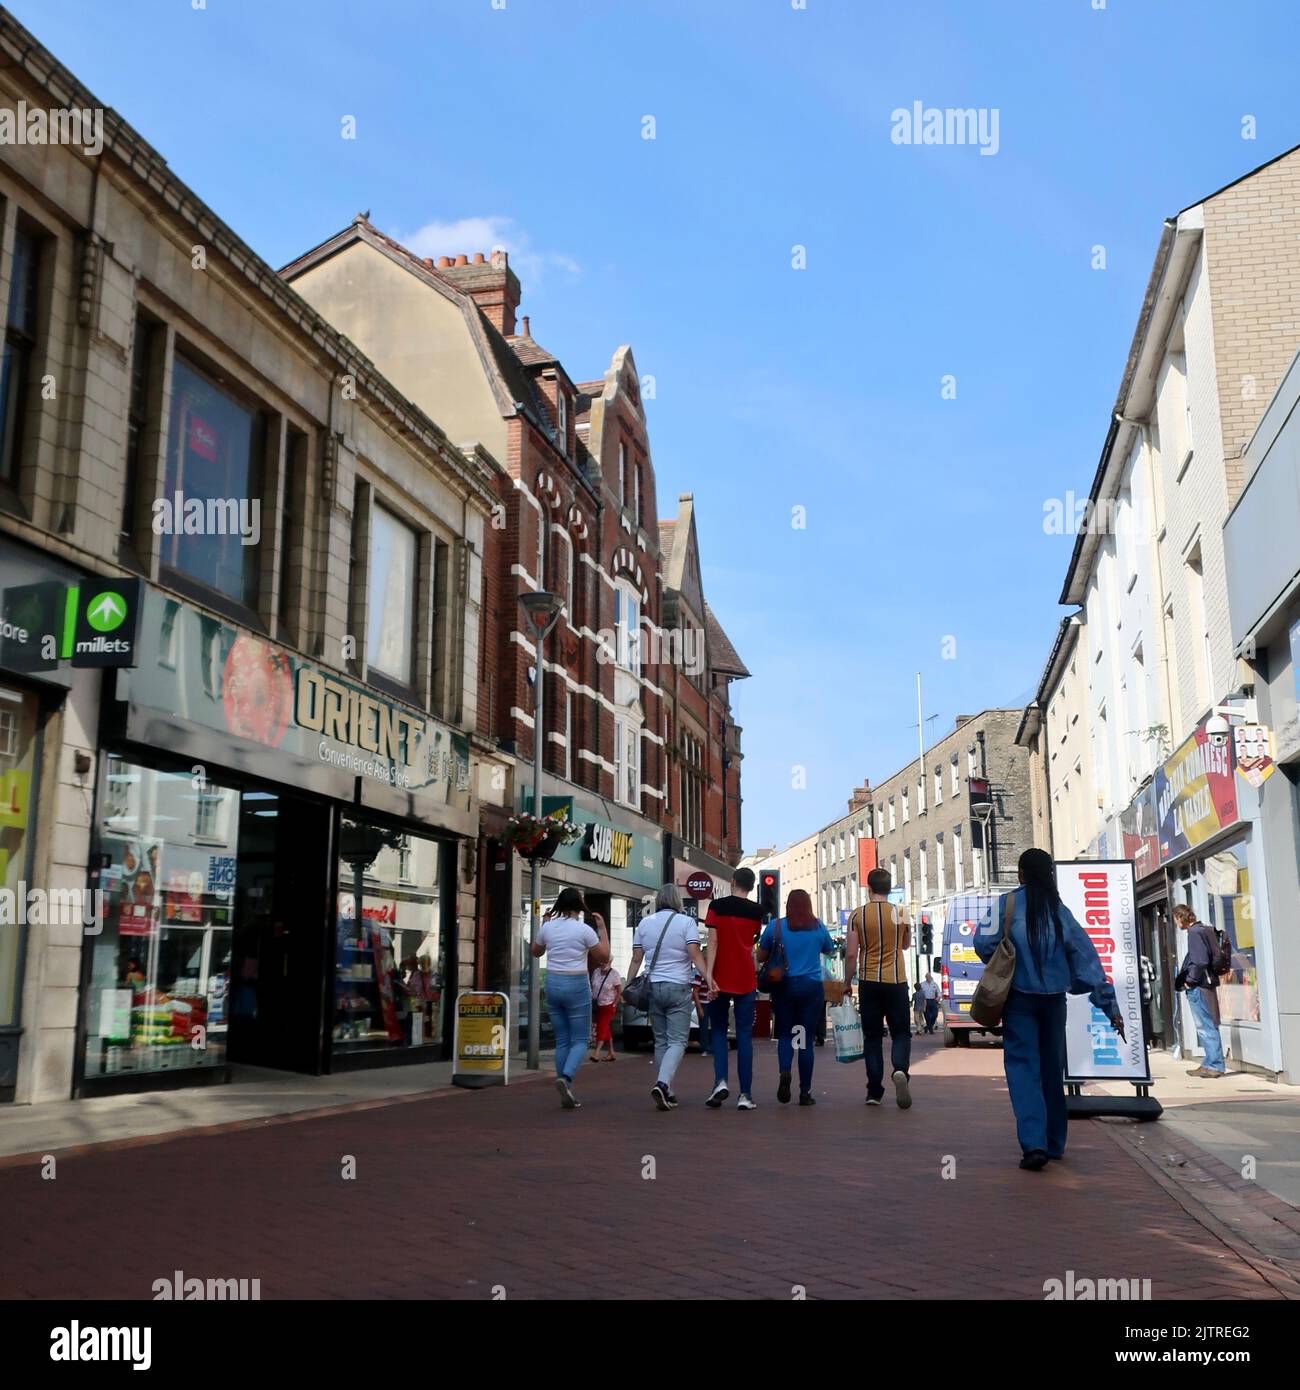 Ipswich, Suffolk, UK - 1 September 2022: Bright sunny morning in the town centre. Carr Street. Stock Photo